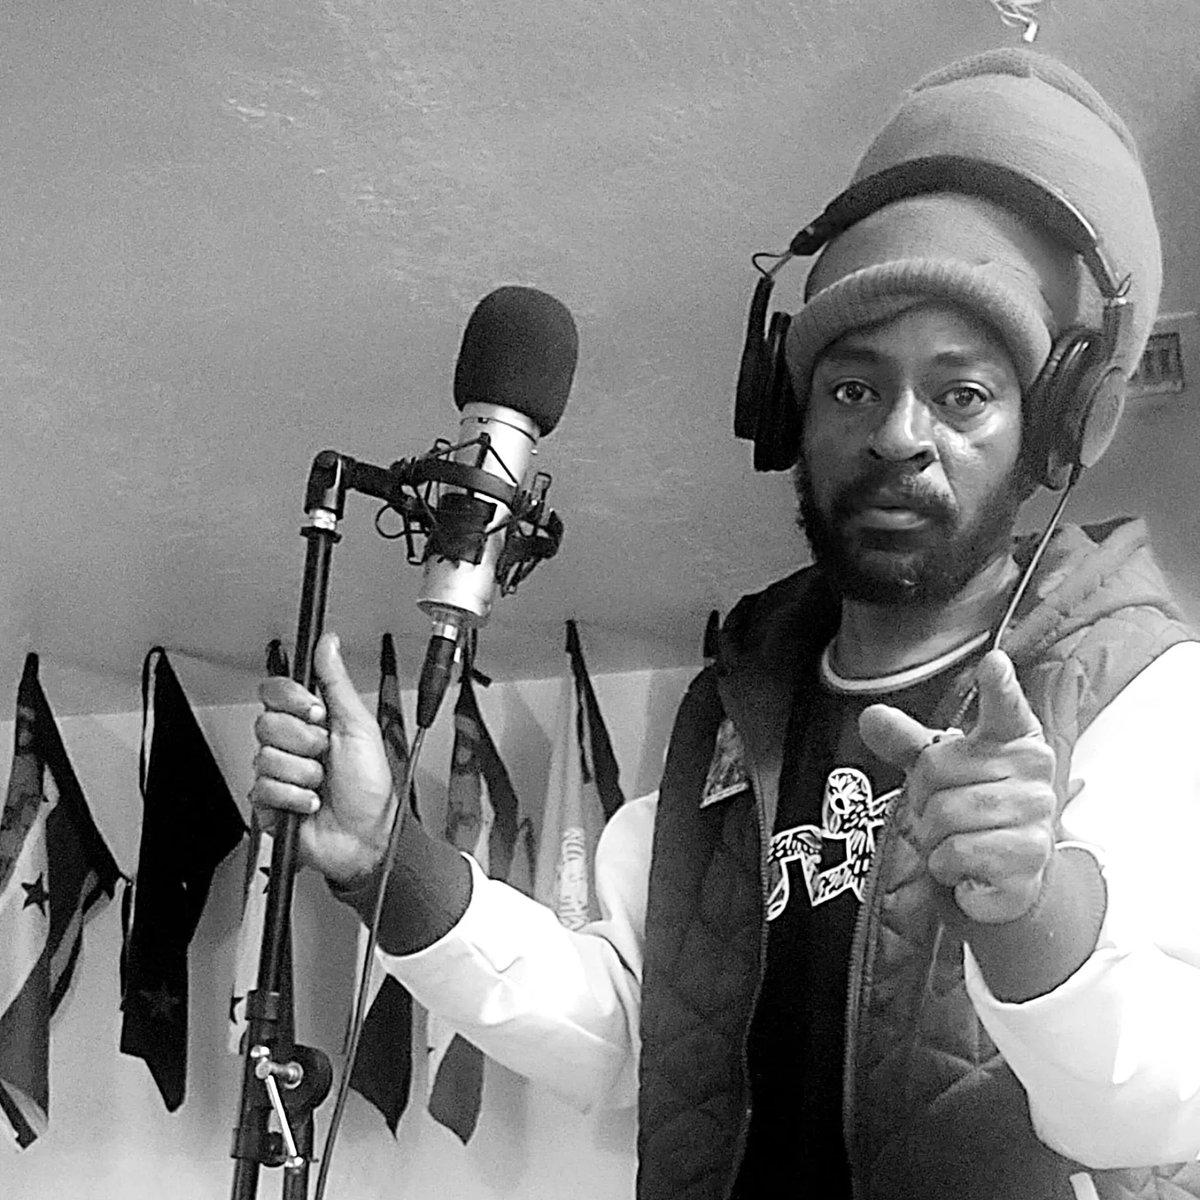 🙏Jah gave I a voice!👨 Man gave I a mic!
👗Mother gave I birth.📘The rest is history! #perfectgiddimani #reggaeartist #instudio